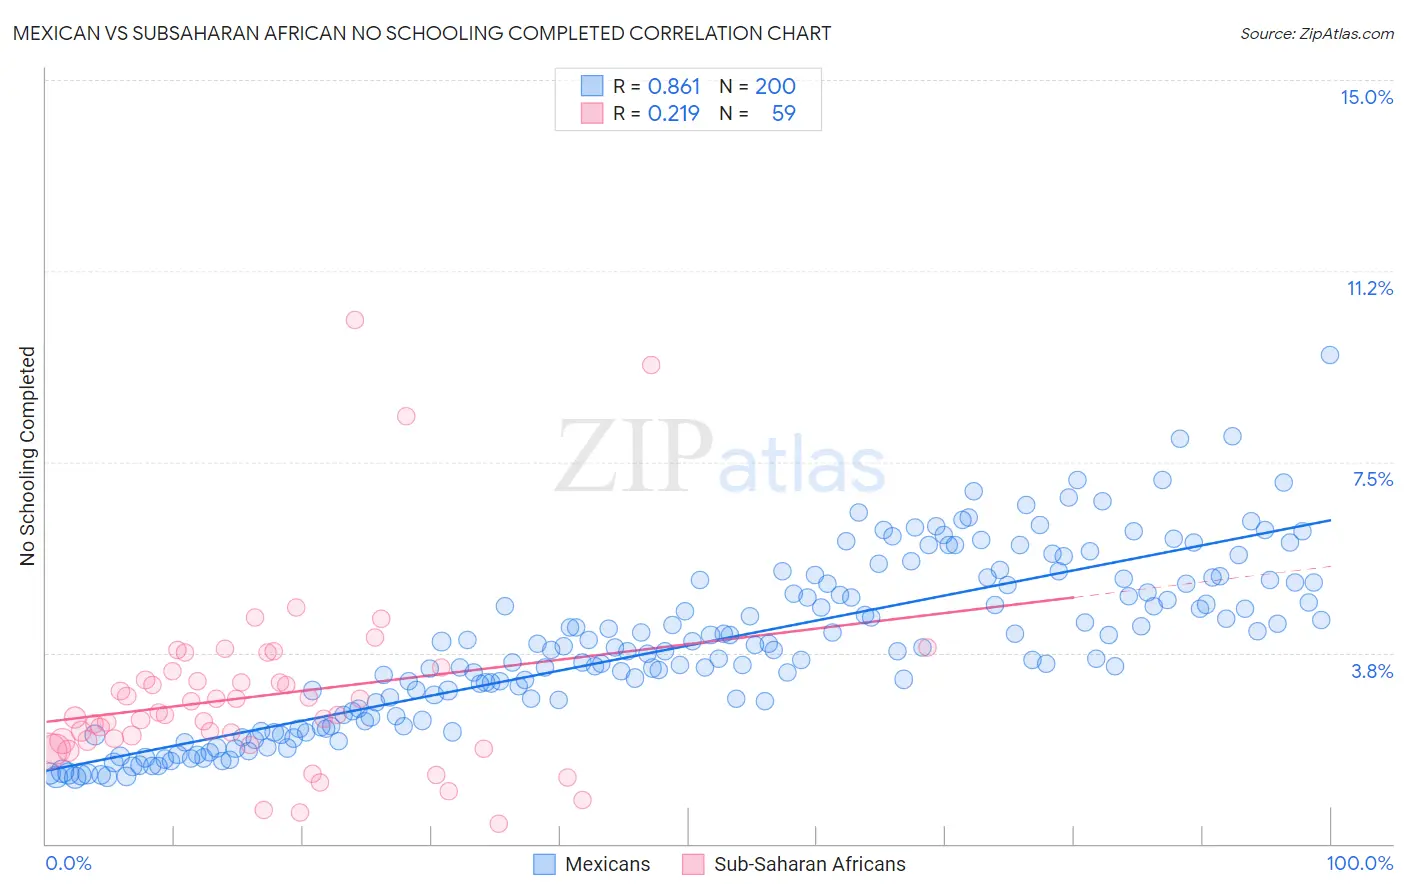 Mexican vs Subsaharan African No Schooling Completed